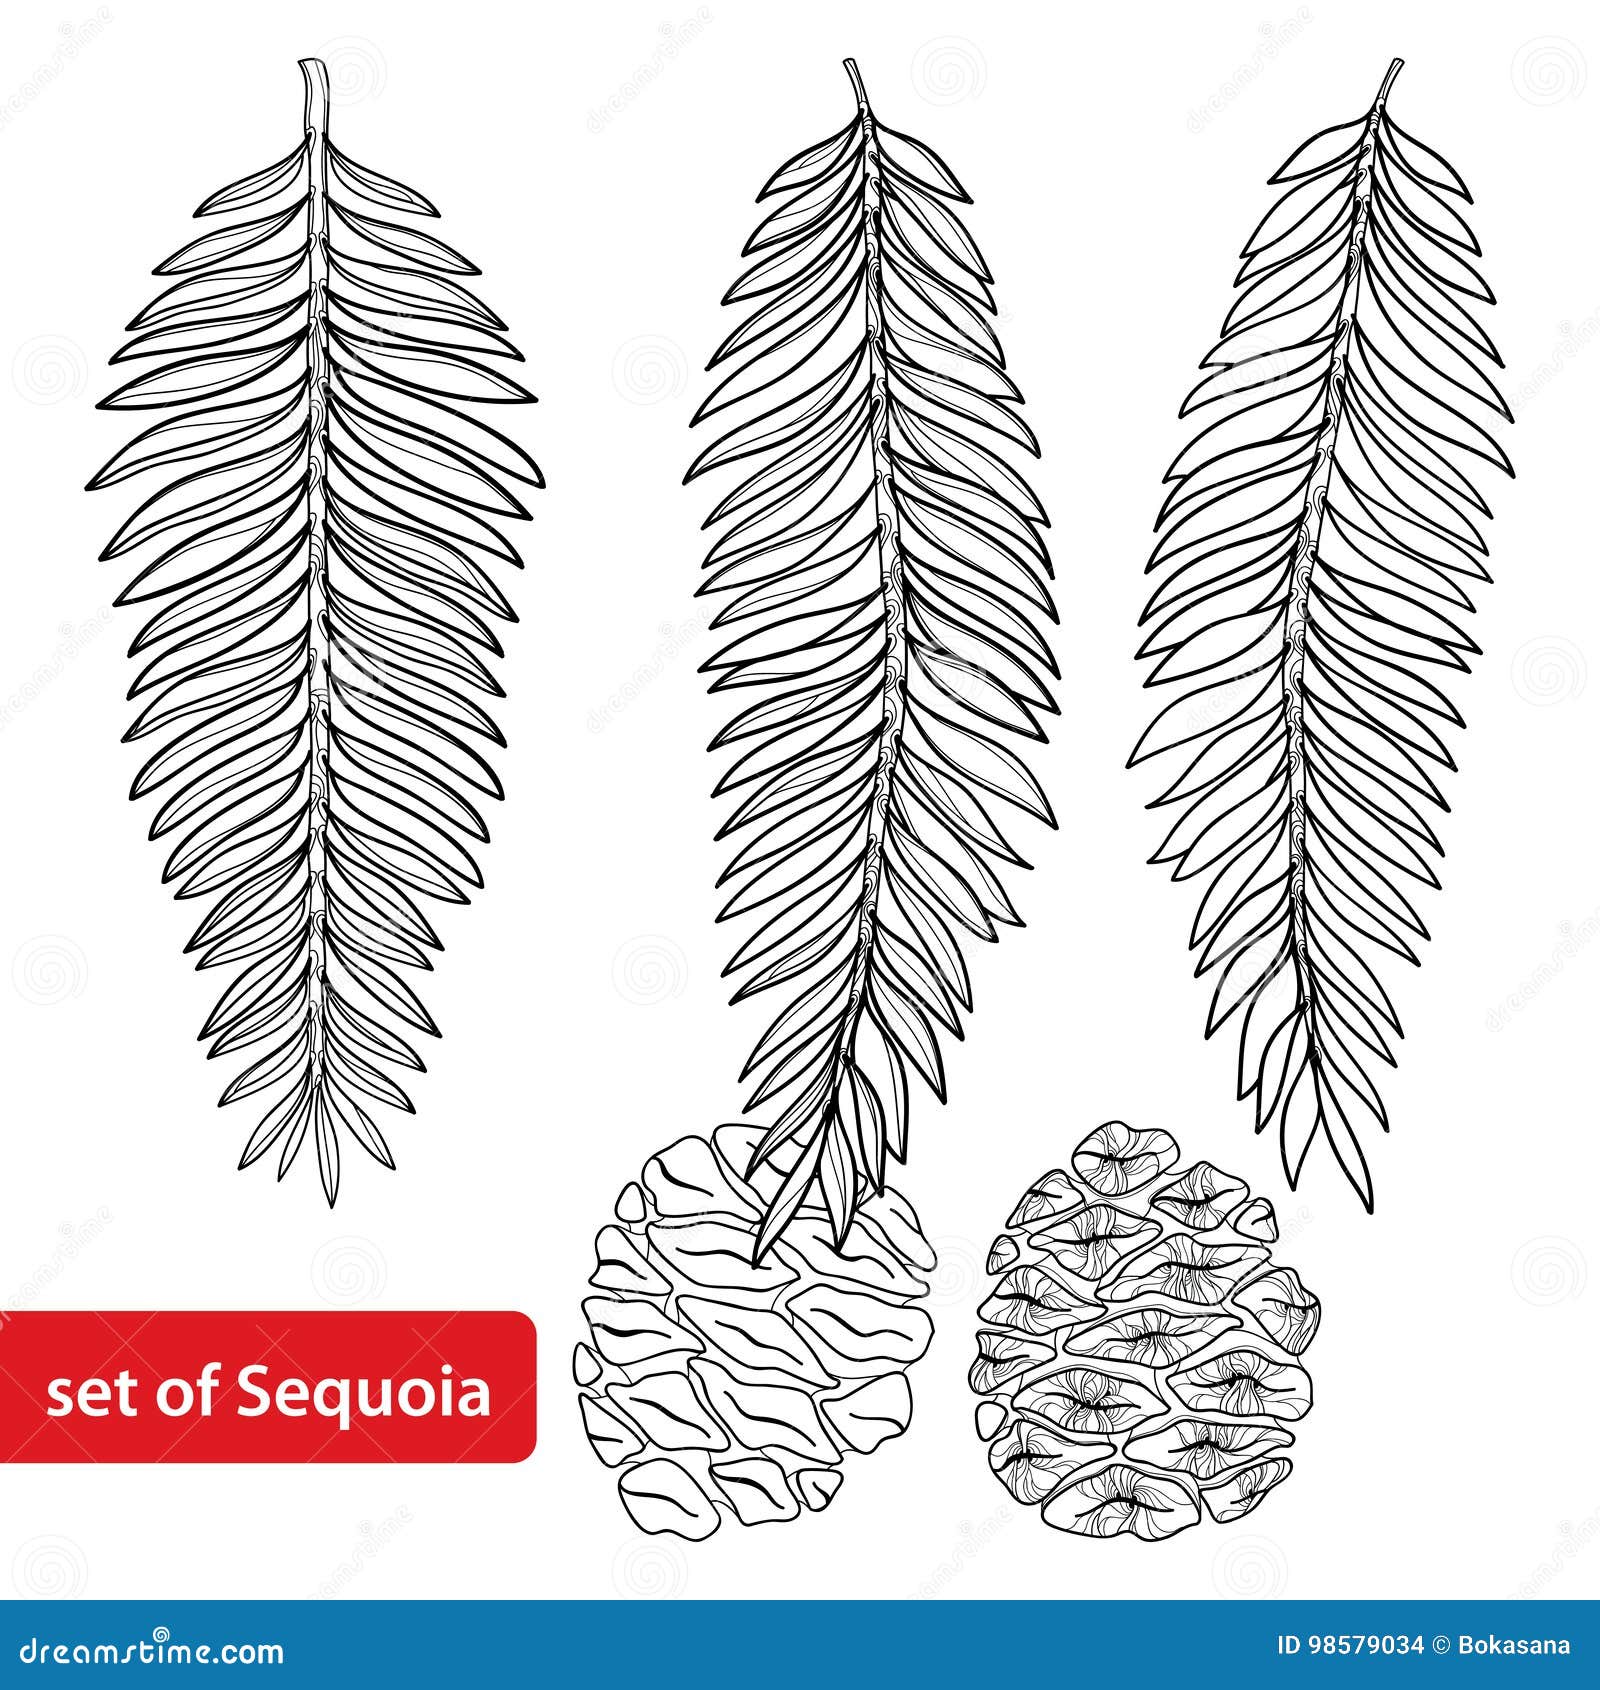  set with outline sequoia or california redwood in black  on white background. coniferous tree with pine and cone.